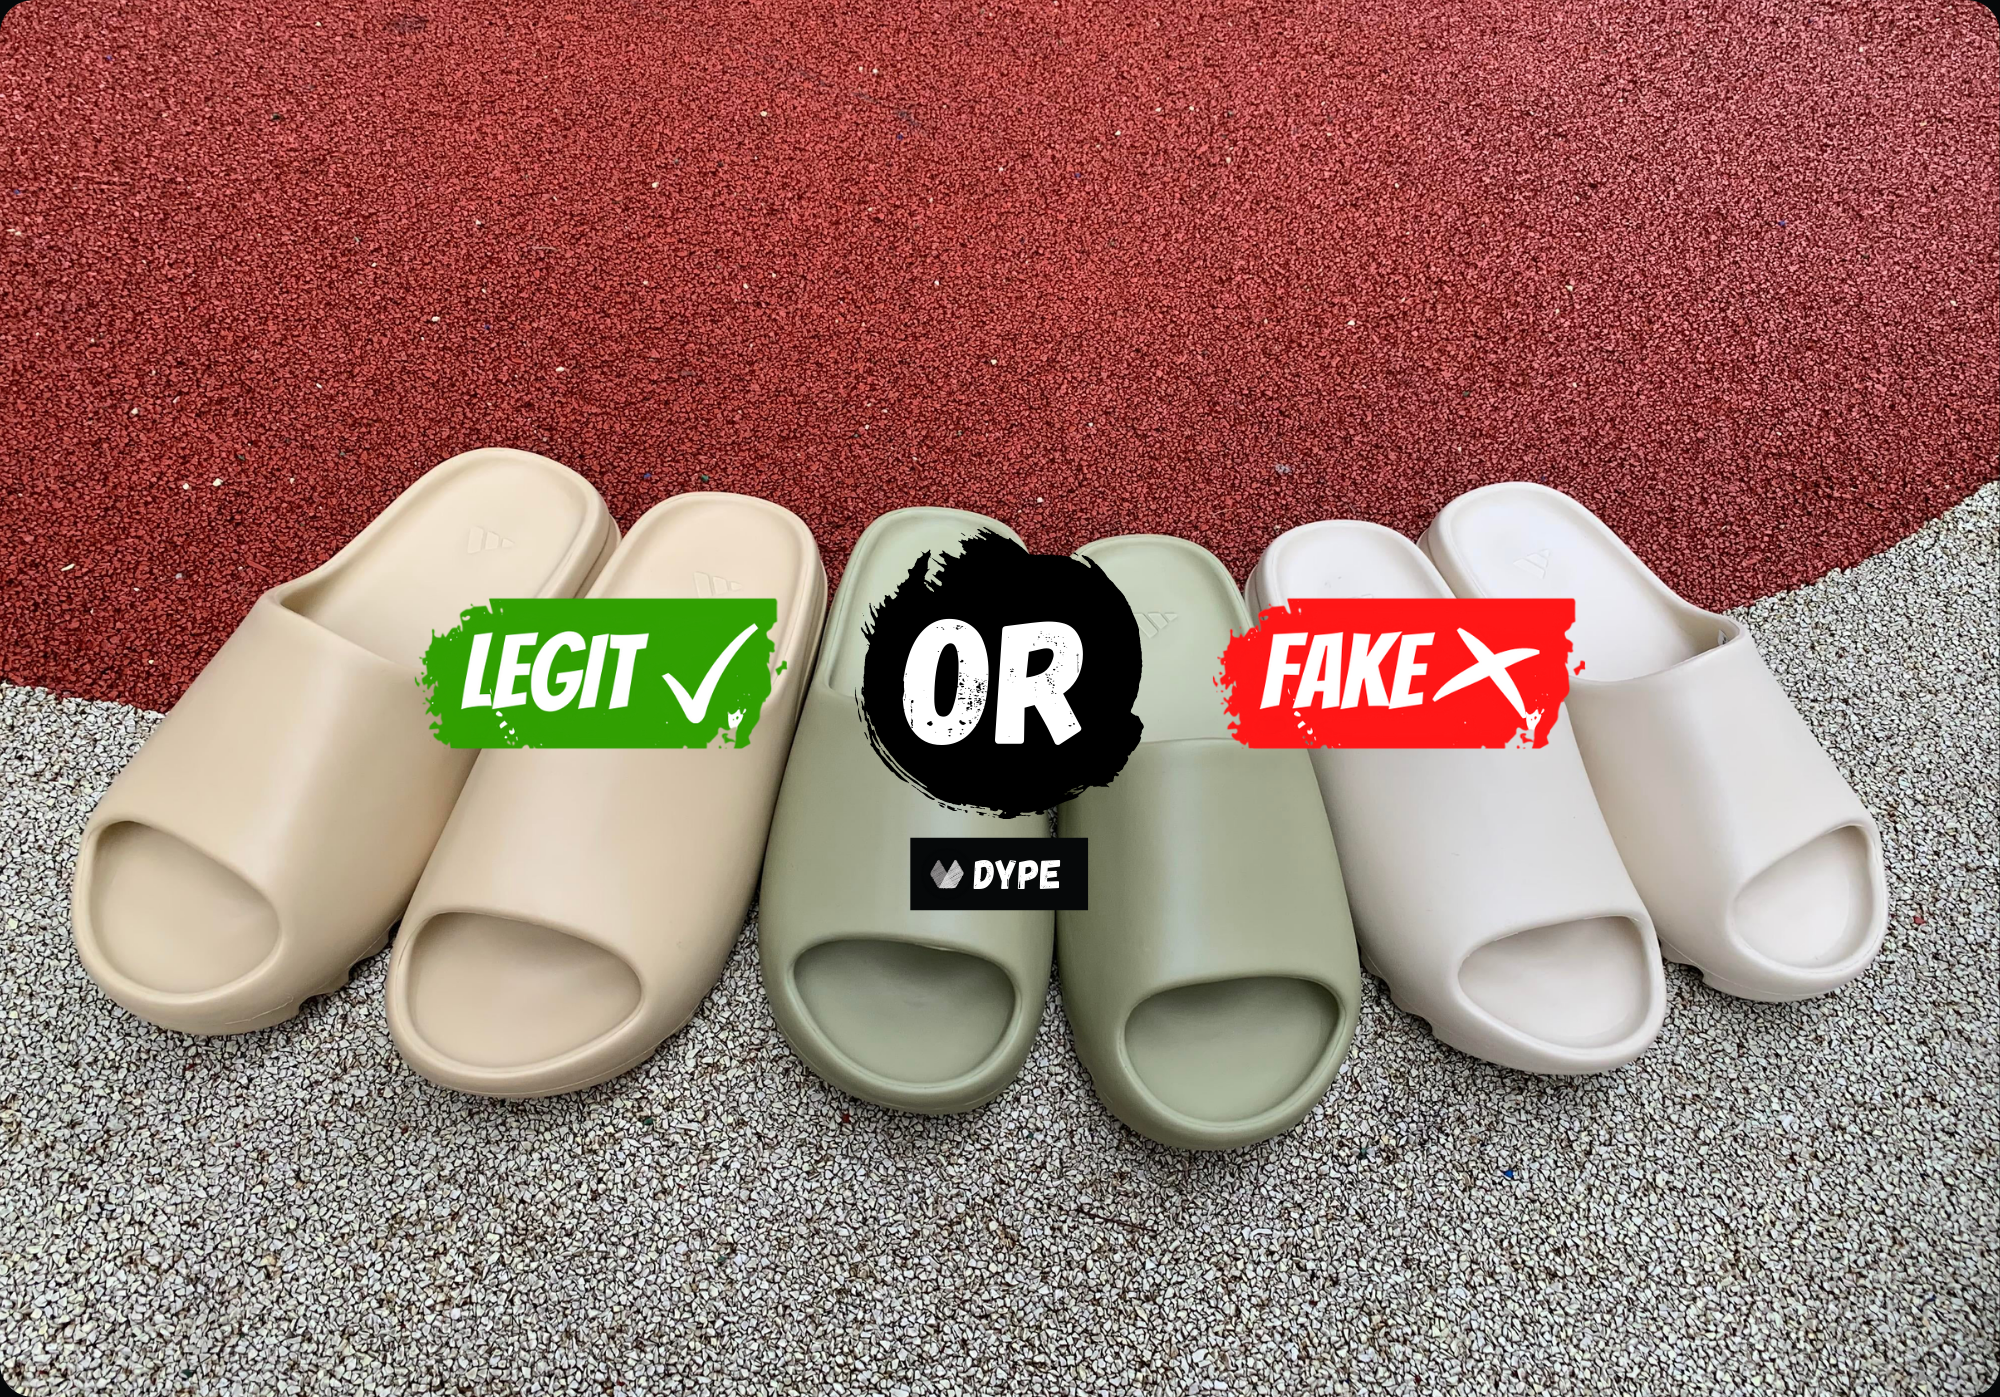 Nike Air Yeezy 1 Legit Check: How To Spot Fakes